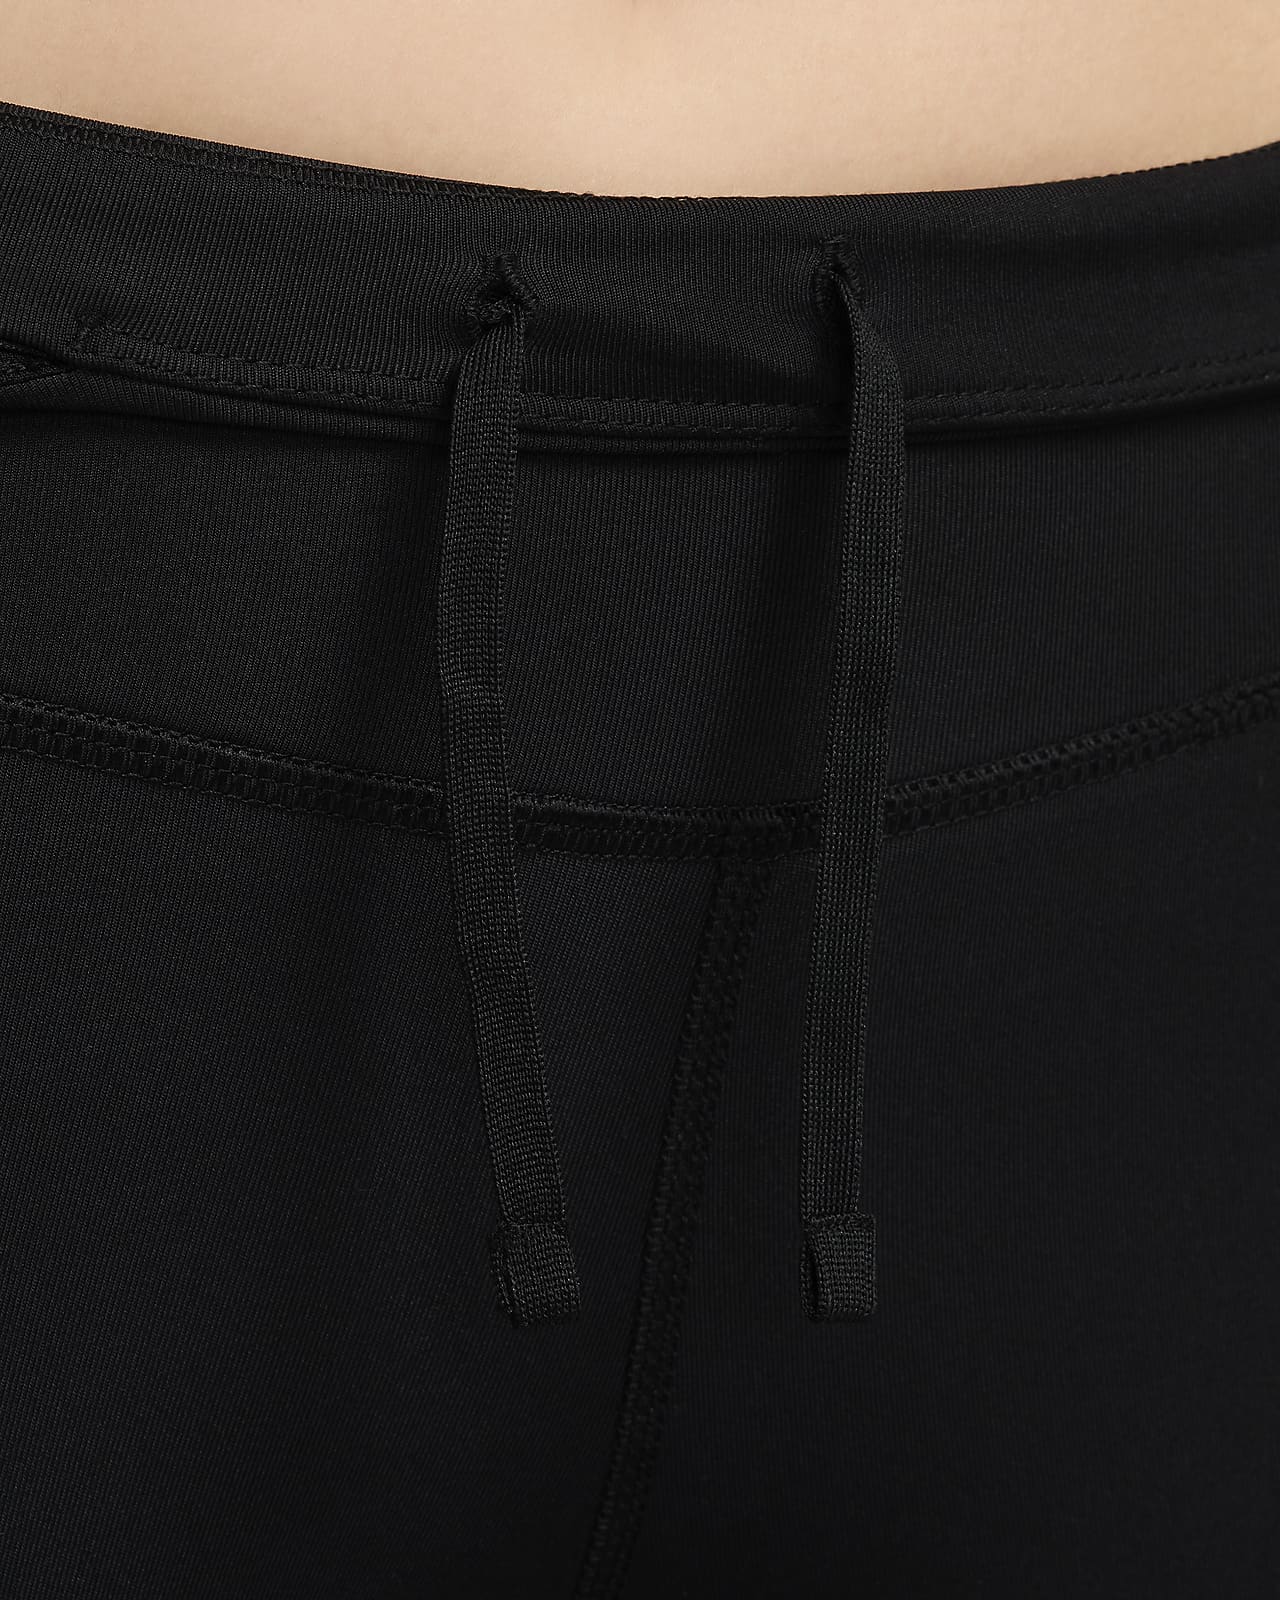 Nike pants Women small Power Epic Run Cropped Running tights speed pocket